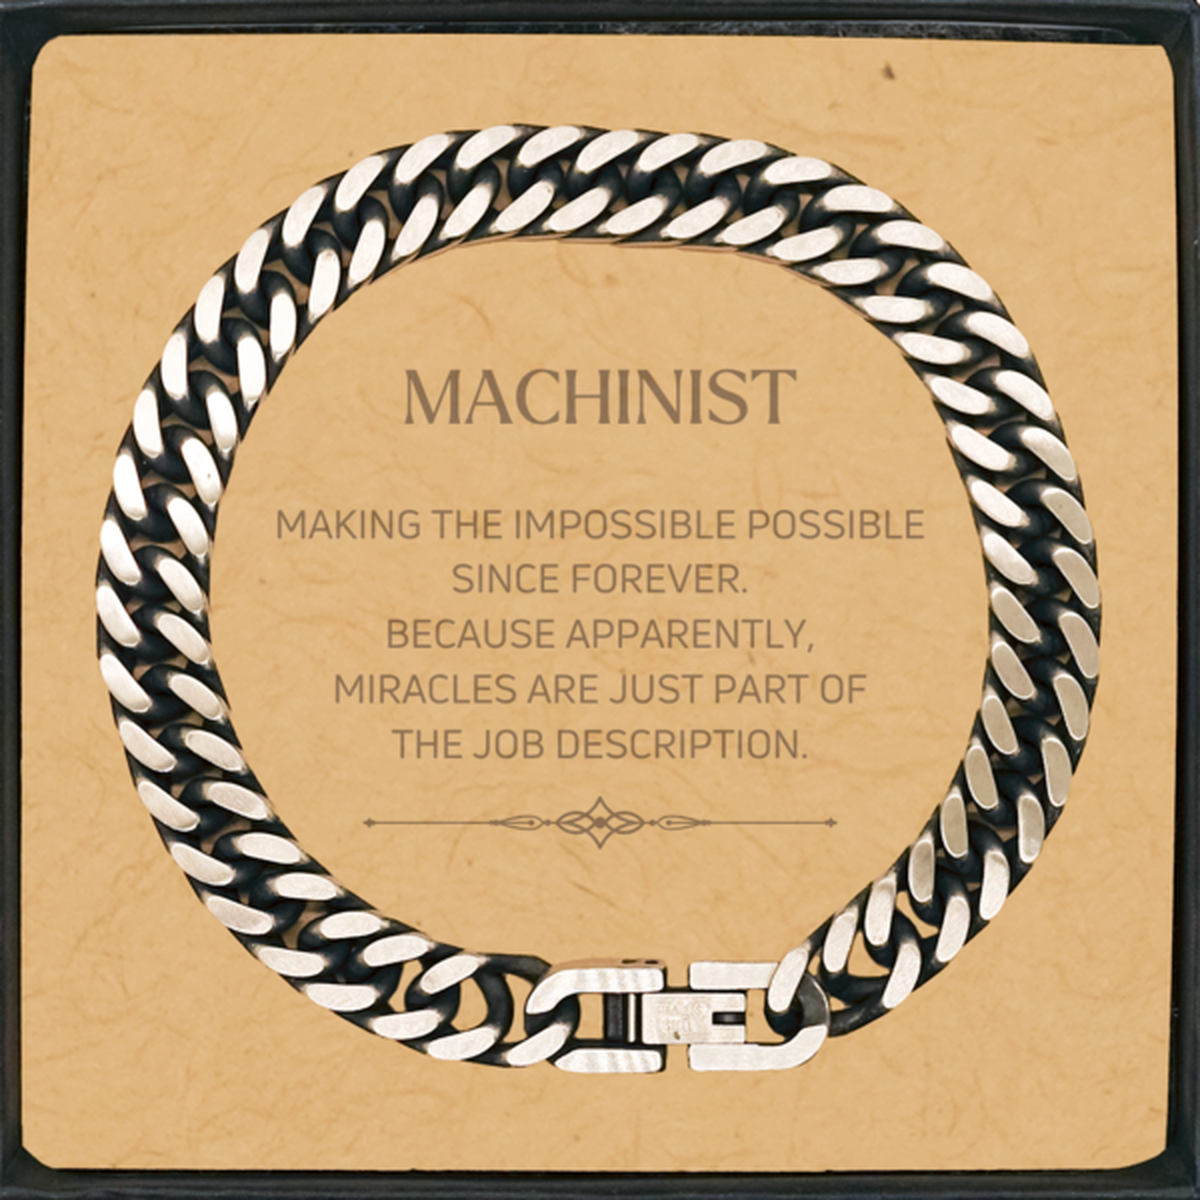 Funny Machinist Gifts, Miracles are just part of the job description, Inspirational Birthday Cuban Link Chain Bracelet For Machinist, Men, Women, Coworkers, Friends, Boss